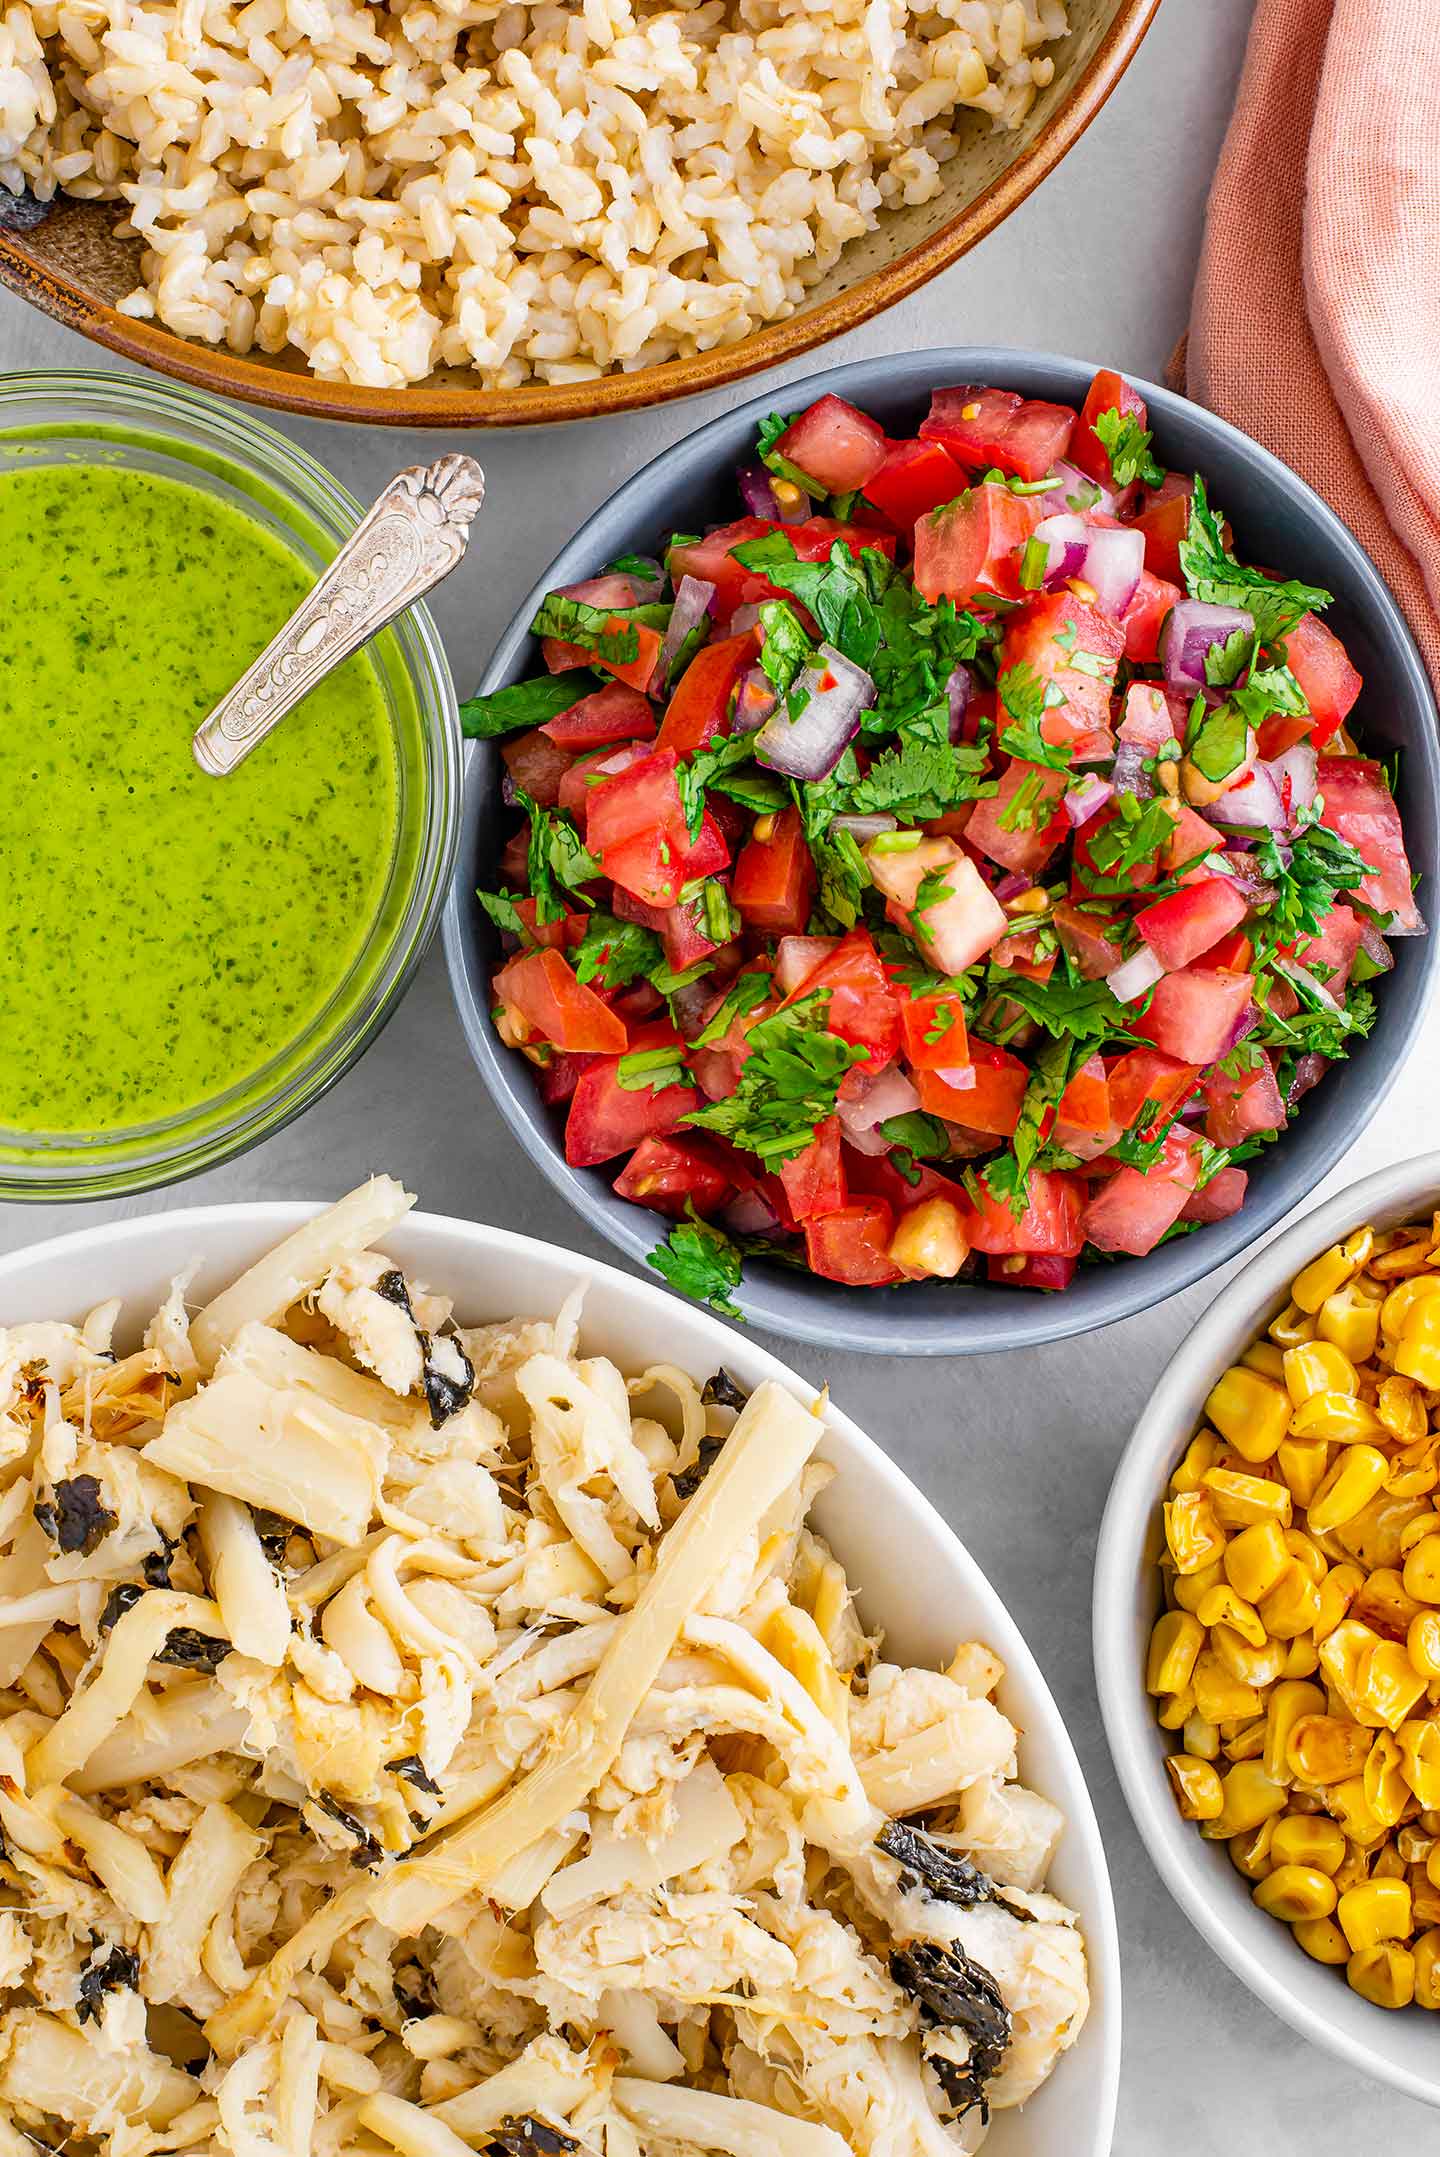 Top down view of easy "fish" taco bowl ingredients. Salsa fresca fills a small bowl, bright green cilantro lime vinaigrette is in a small dish with a spoon, the baked hearts of palm, charred corn, and brown rice surround.